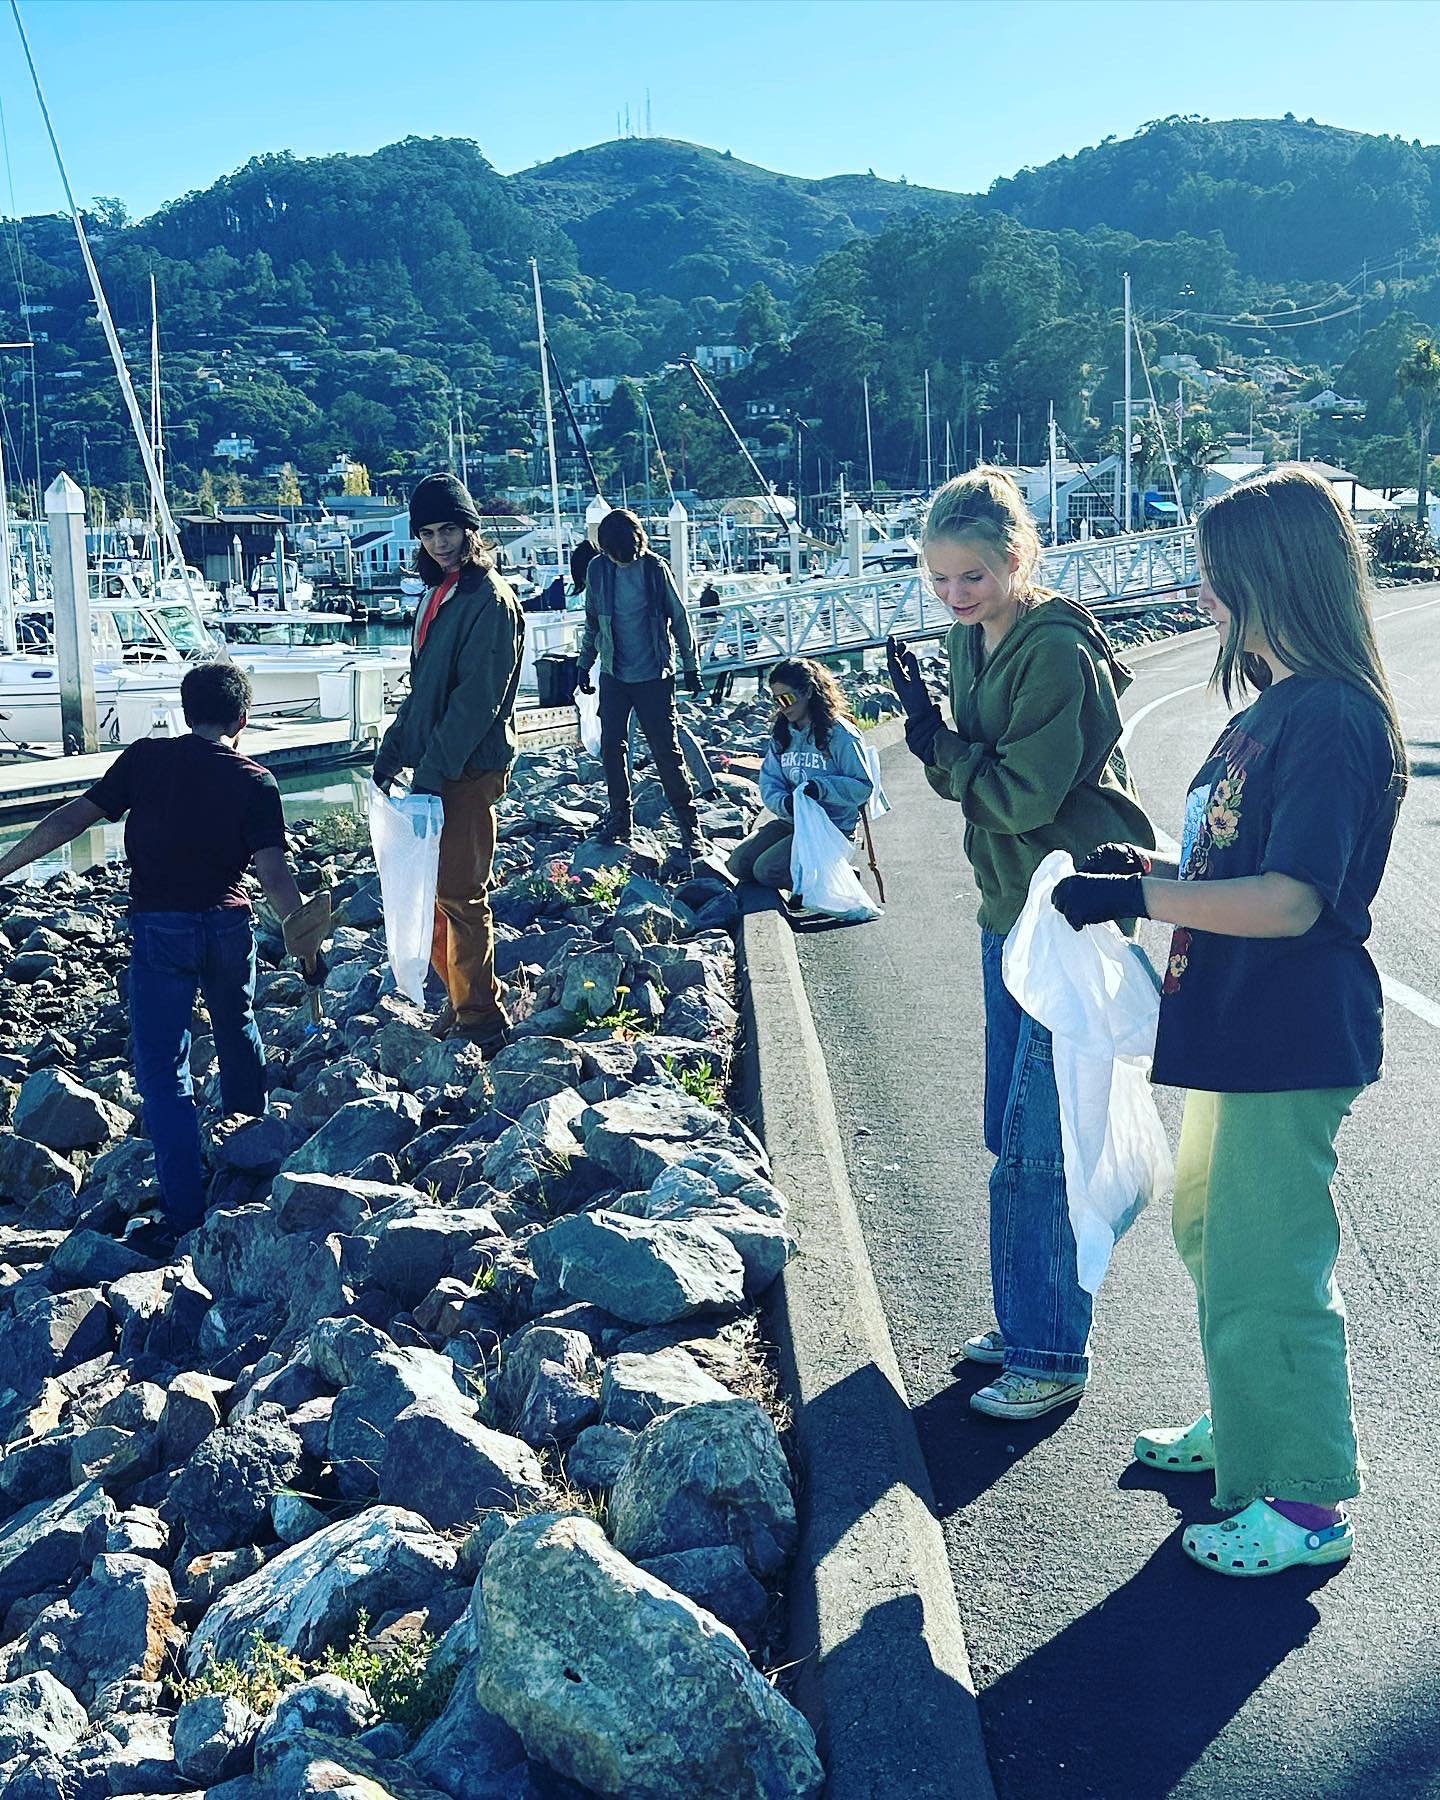 Any day is a good day to be #coastalcleanupday and the homeschool group had a blast removing large amounts of fishing line from the pier and styrofoam from the shoreline, among all kinds of other debris.  Plastic pollution is everywhere, please do yo